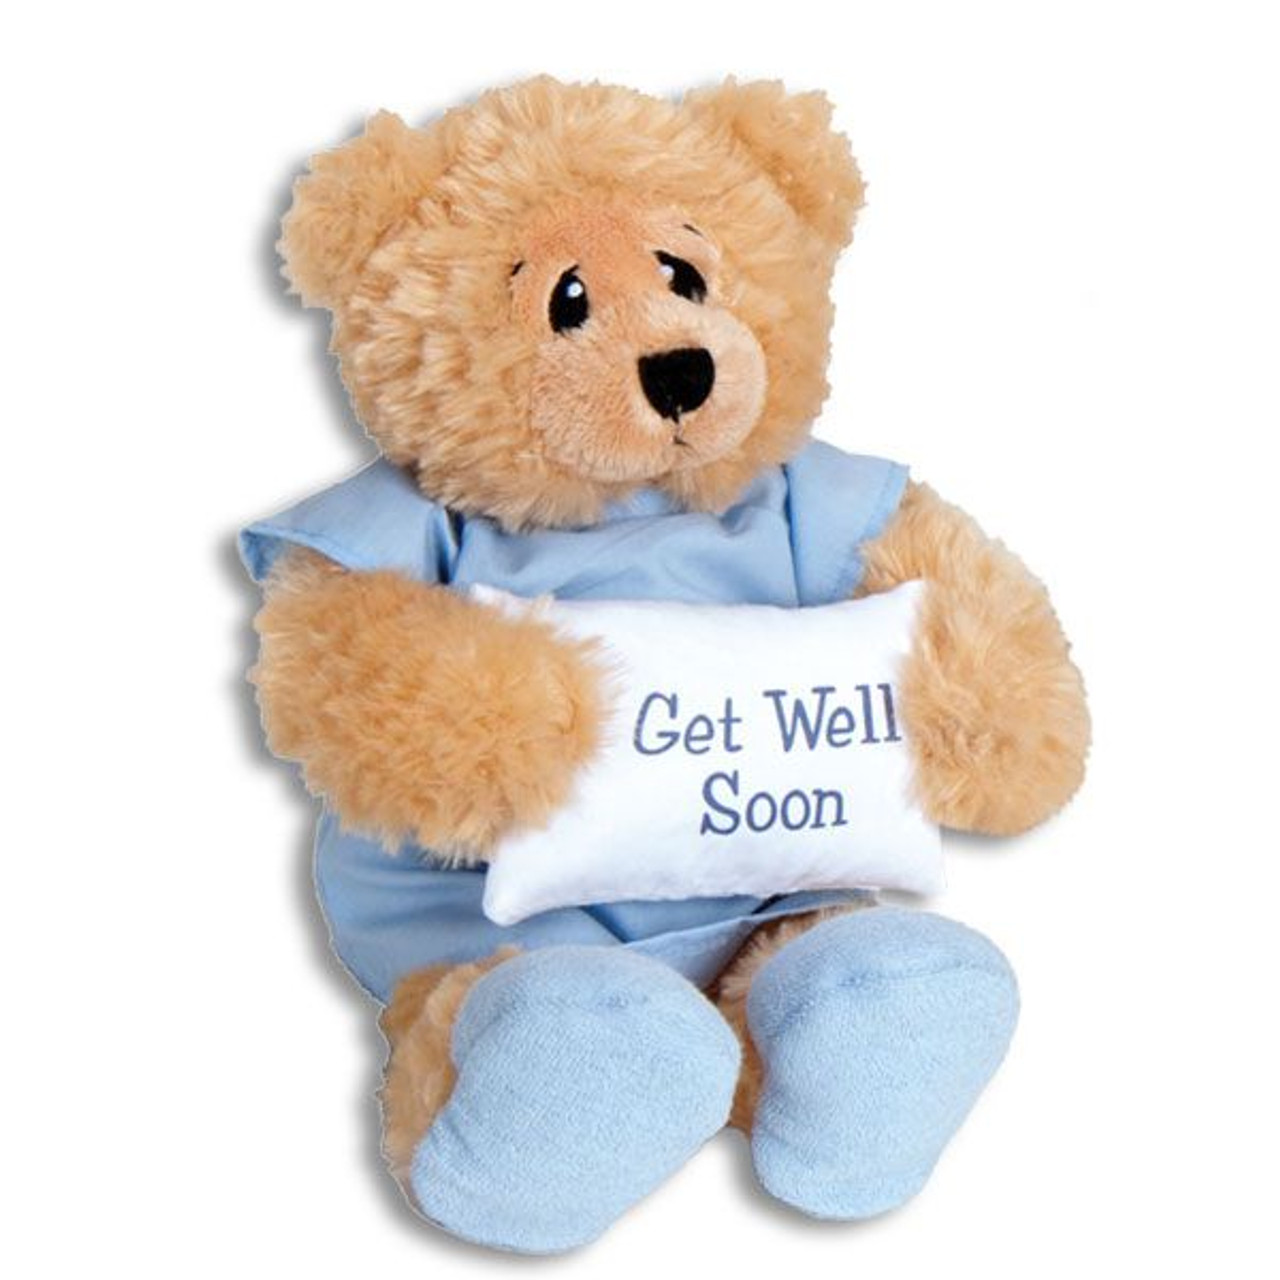 Get Well Soon Plush Teddy Bear in Hospital Patient Gown